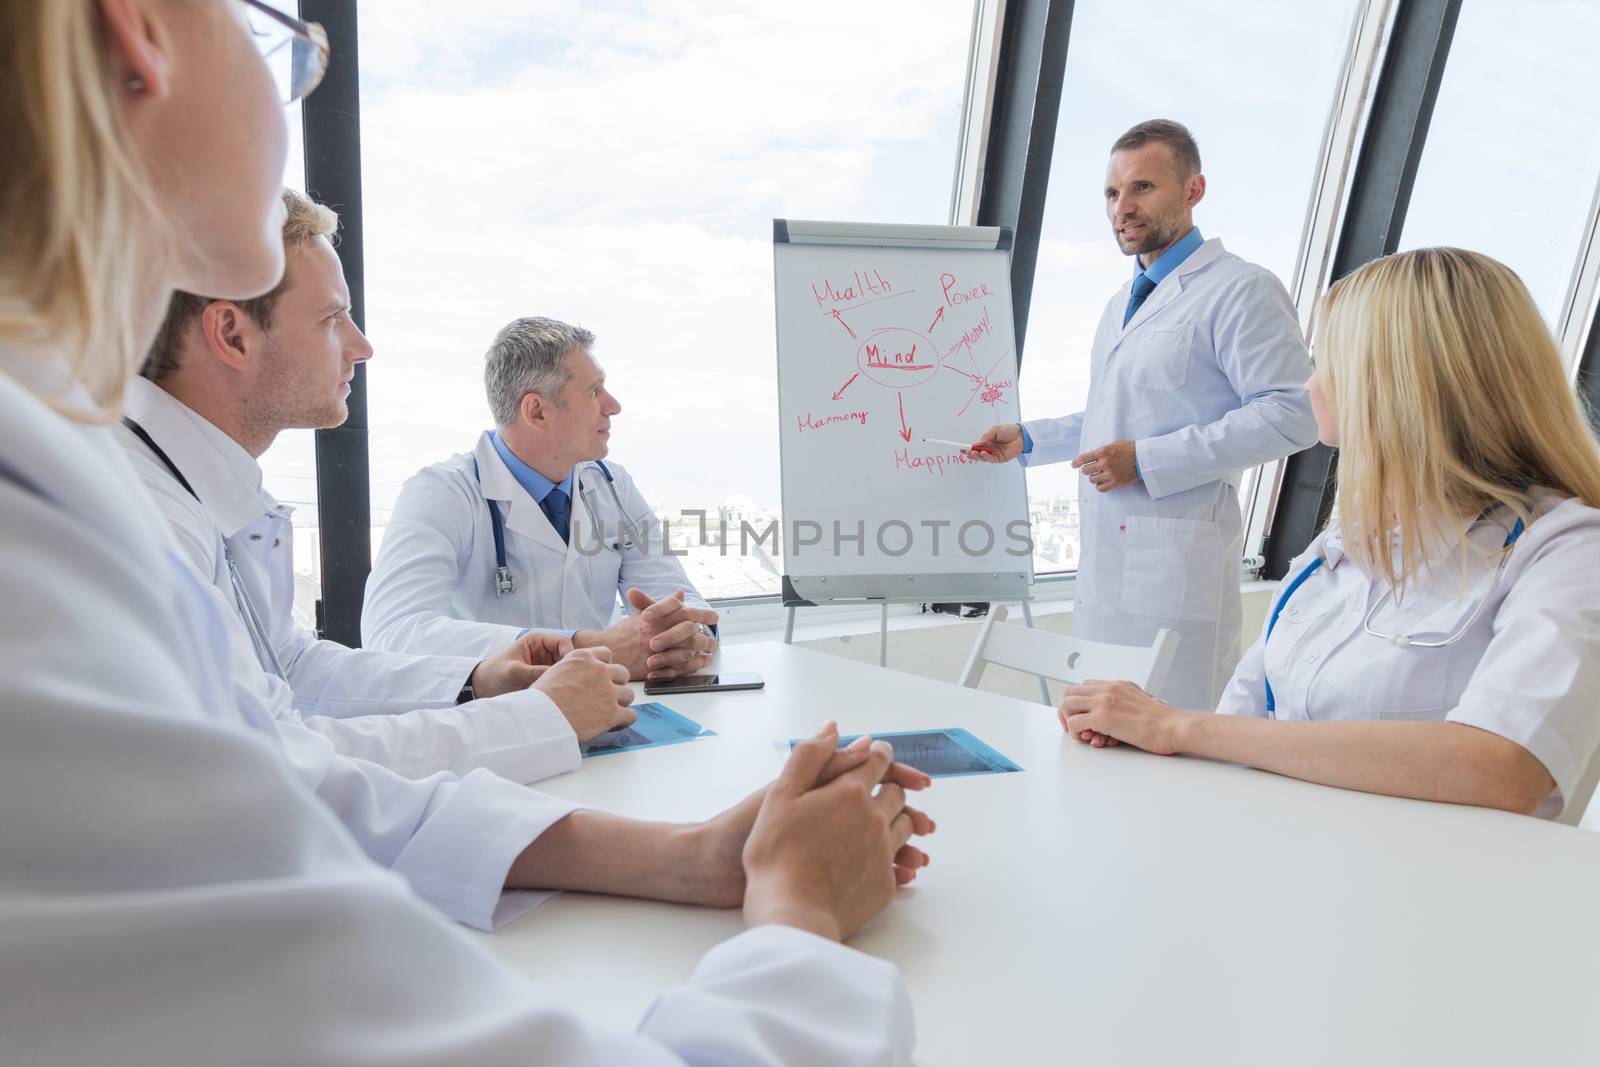 Team of doctors listening mental health conceptual presentation in clinical office